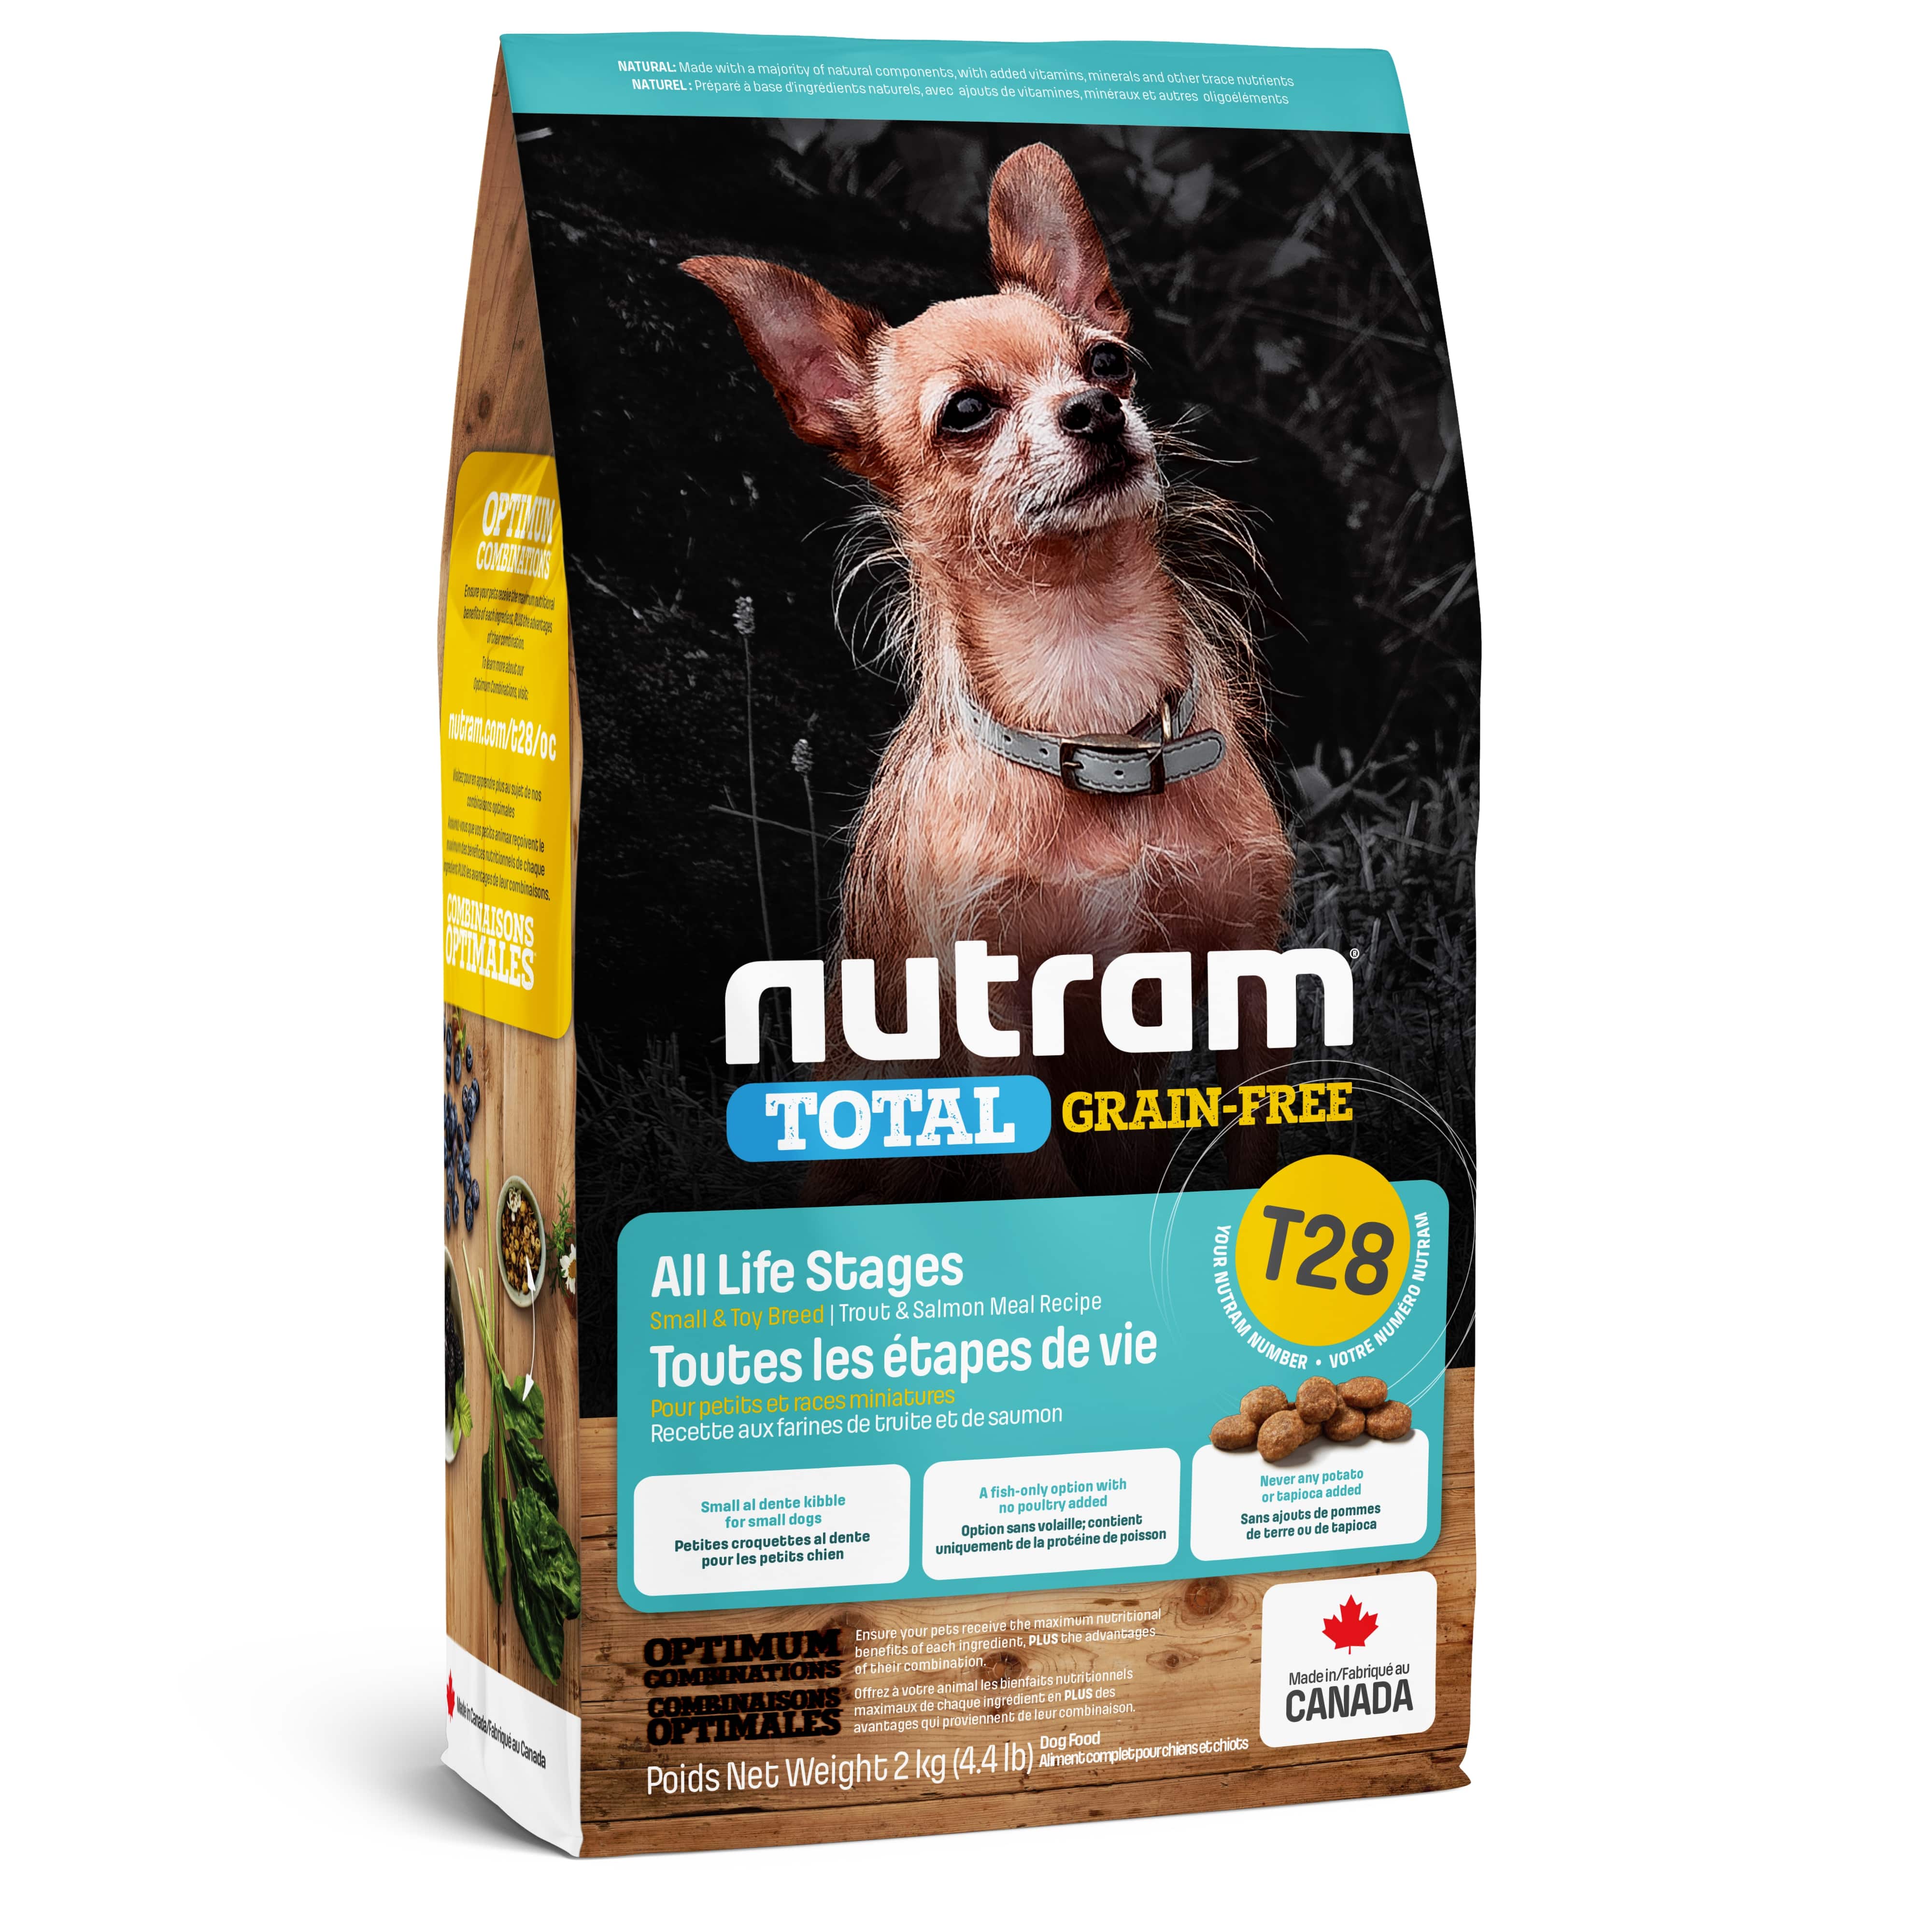 T28 Nutram Total Grain-Free® Salmon & Trout Small Breed Dog Food